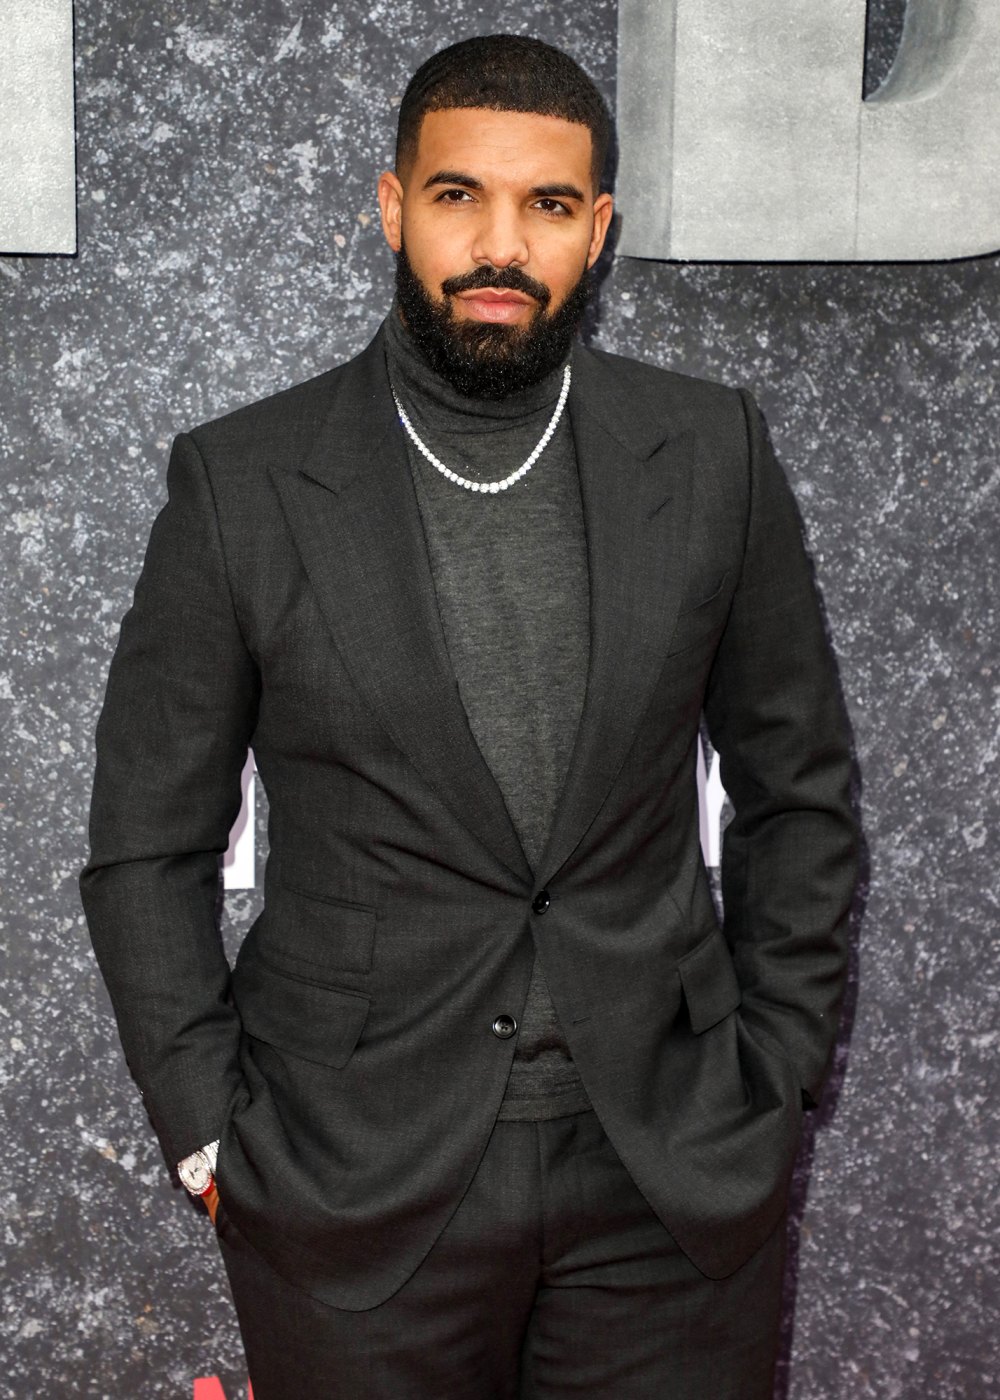 Drake Explains Why He Has Never Been Married, Shares Priorities | Us Weekly